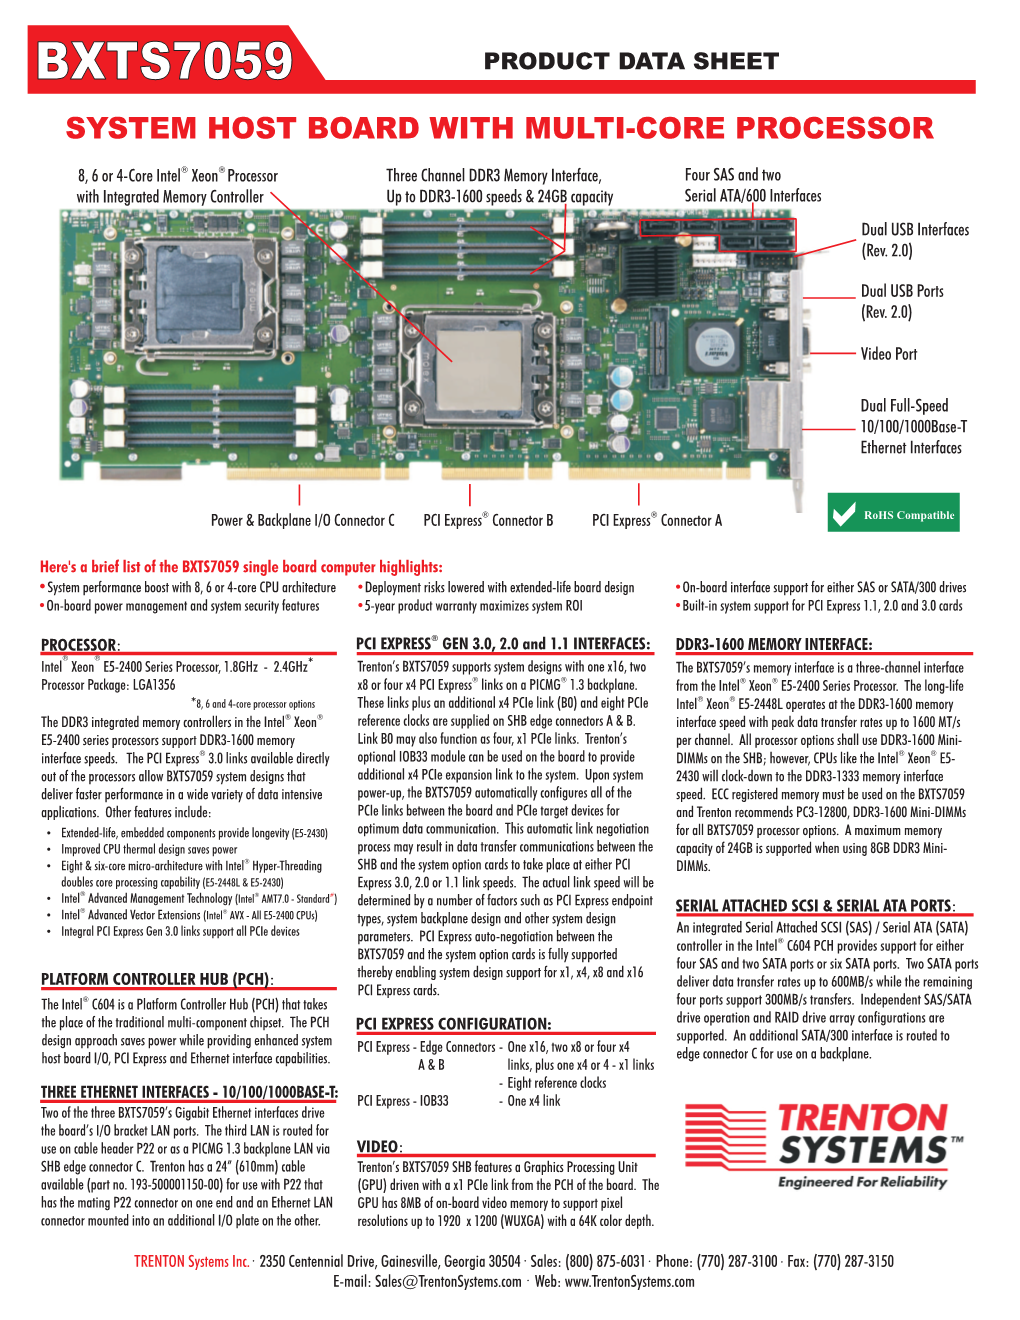 Bxts7059 Product Data Sheet System Host Board with Multi-Core Processor